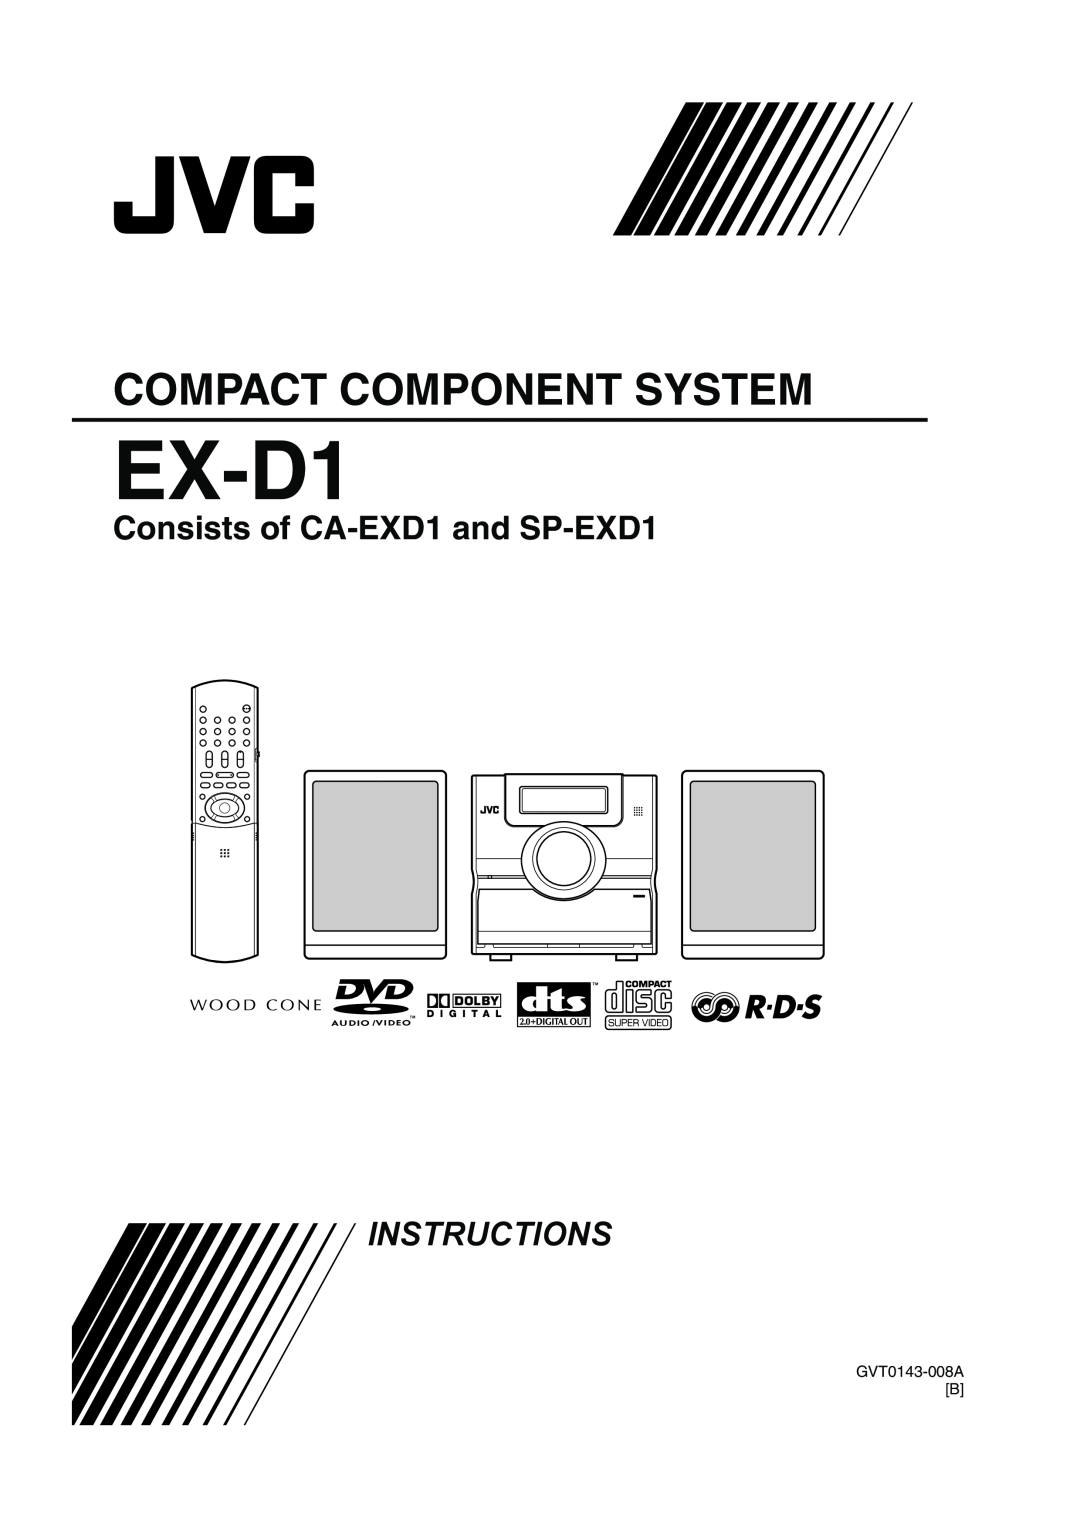 JVC GVT0143-008A manual Consists of CA-EXD1 and SP-EXD1, EX-D1, Compact Component System, Instructions 